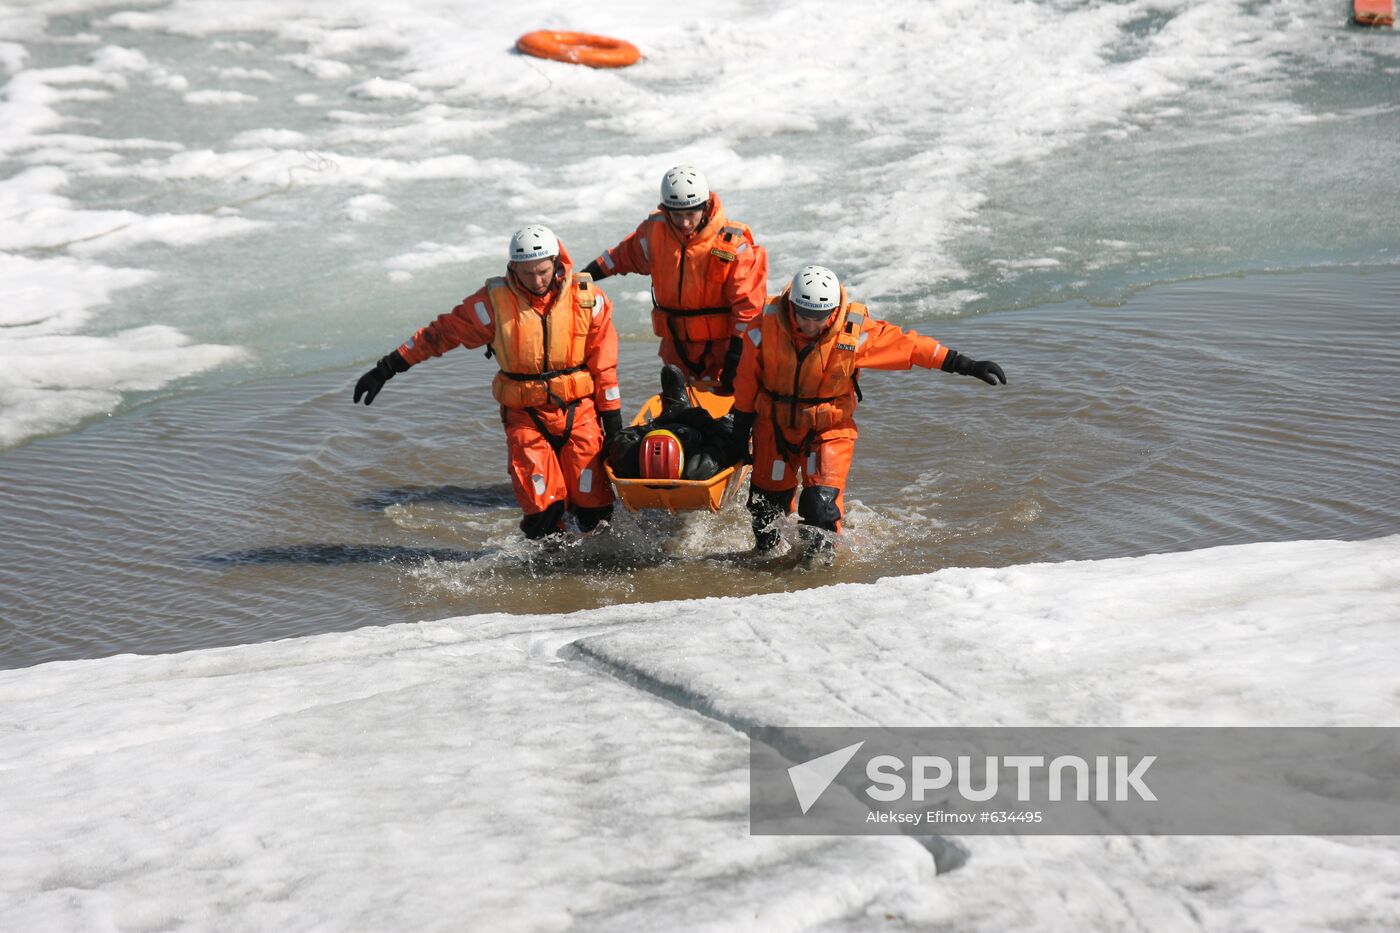 Exhibition rescue drill with people in distress on ice